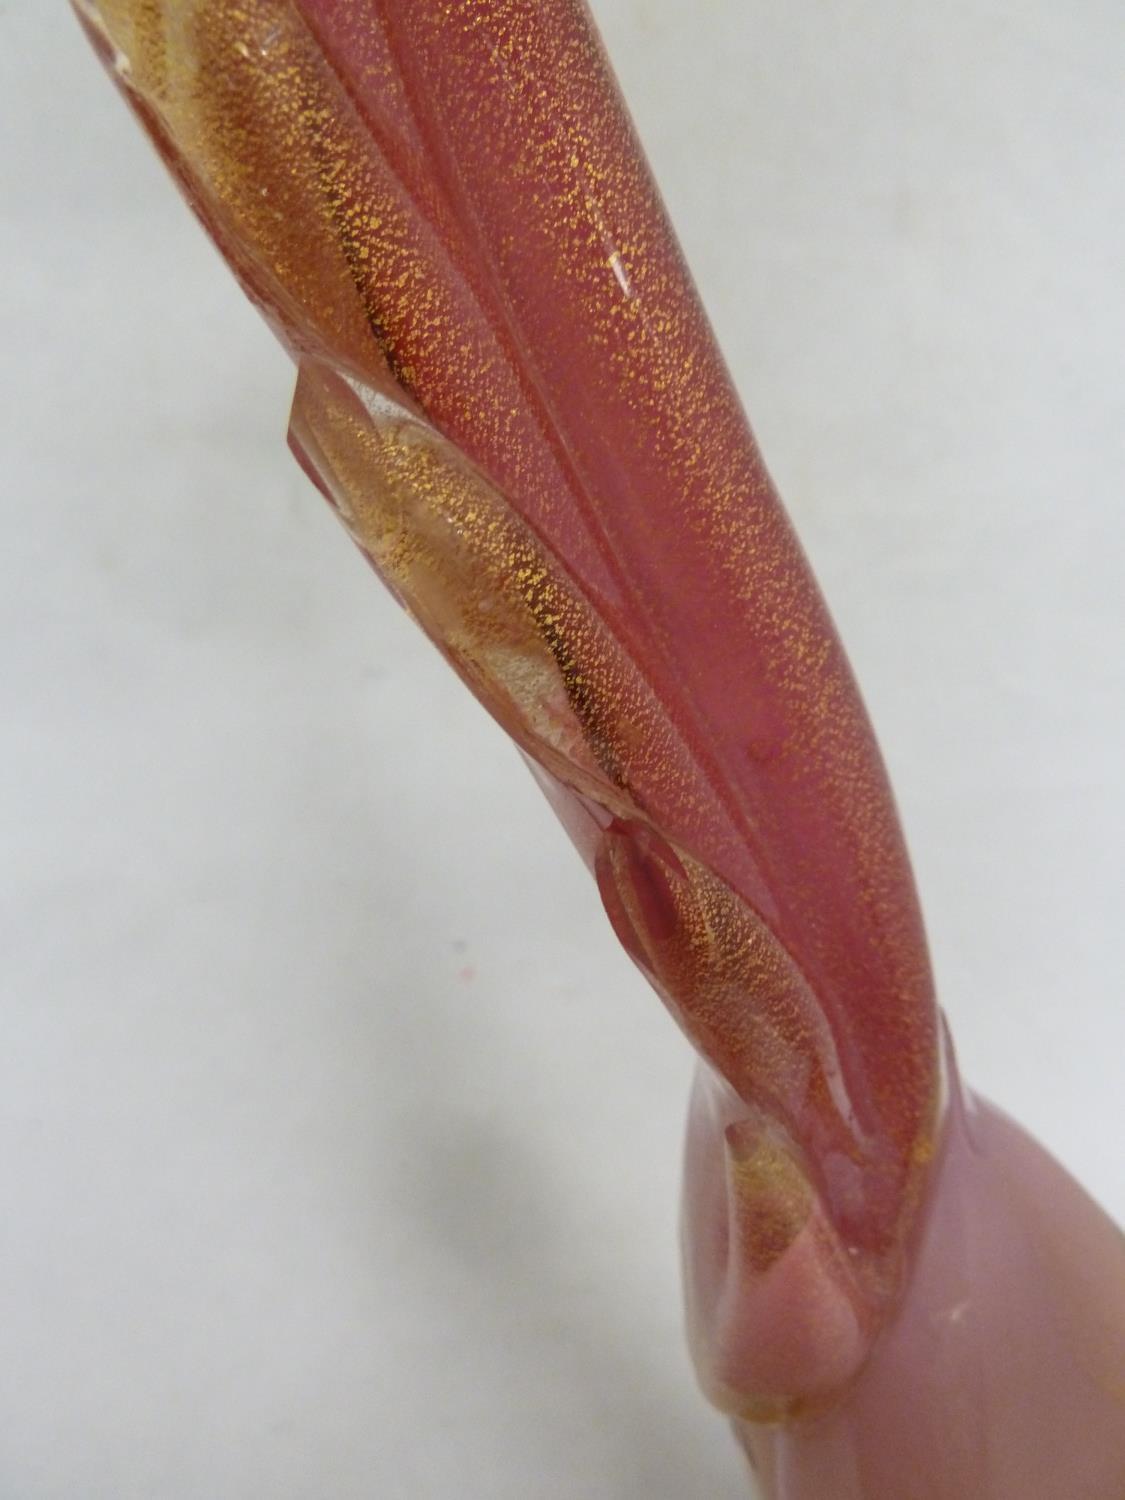 Murano glass - Pheasant - modelled standing with elongated tail upright, in pink and aventurine gold - Image 7 of 11